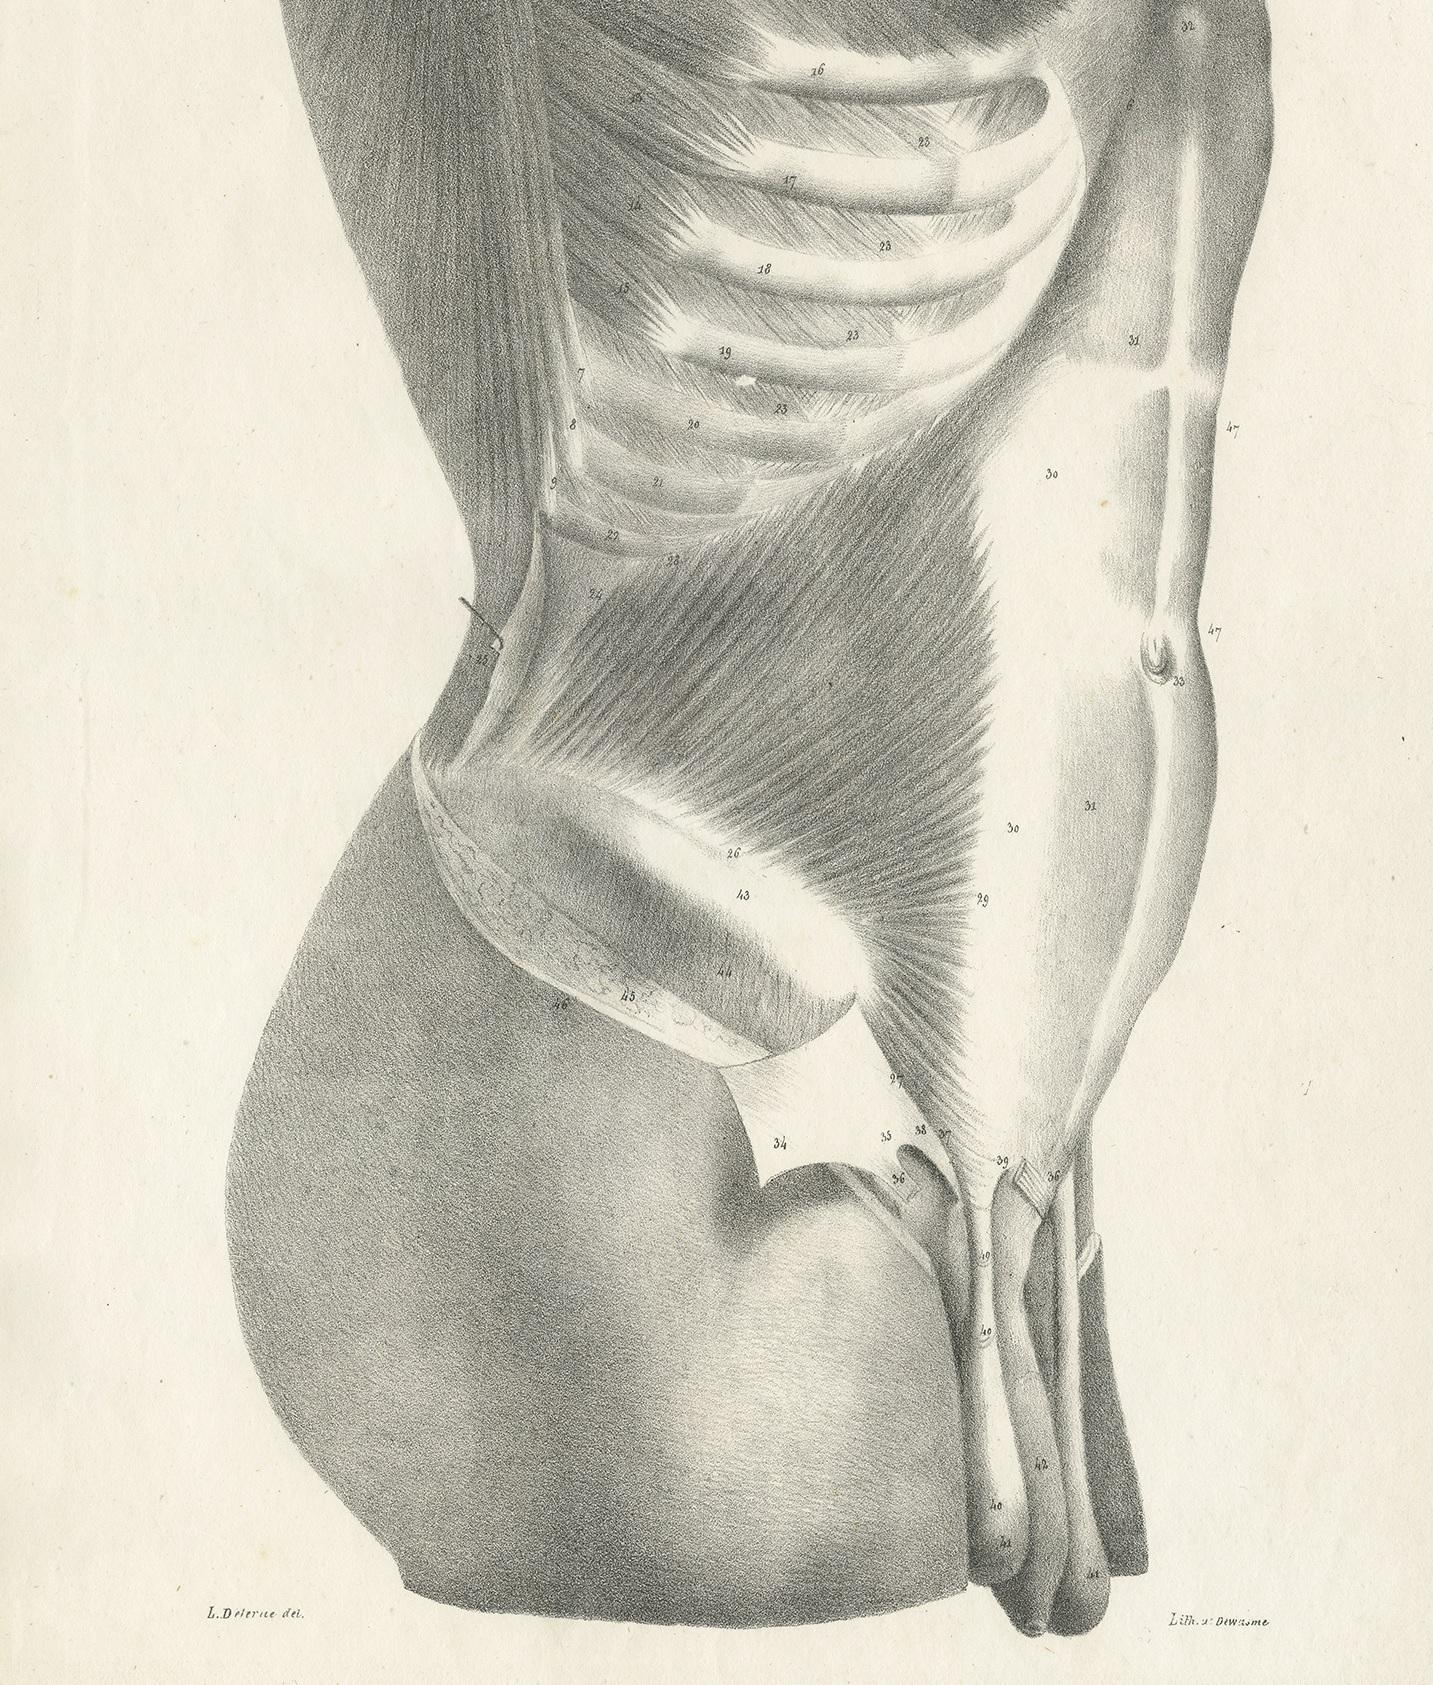 19th Century Pl. LXXIII Antique Anatomy / Medical Print of the Male Torso by Cloquet, '1821' For Sale